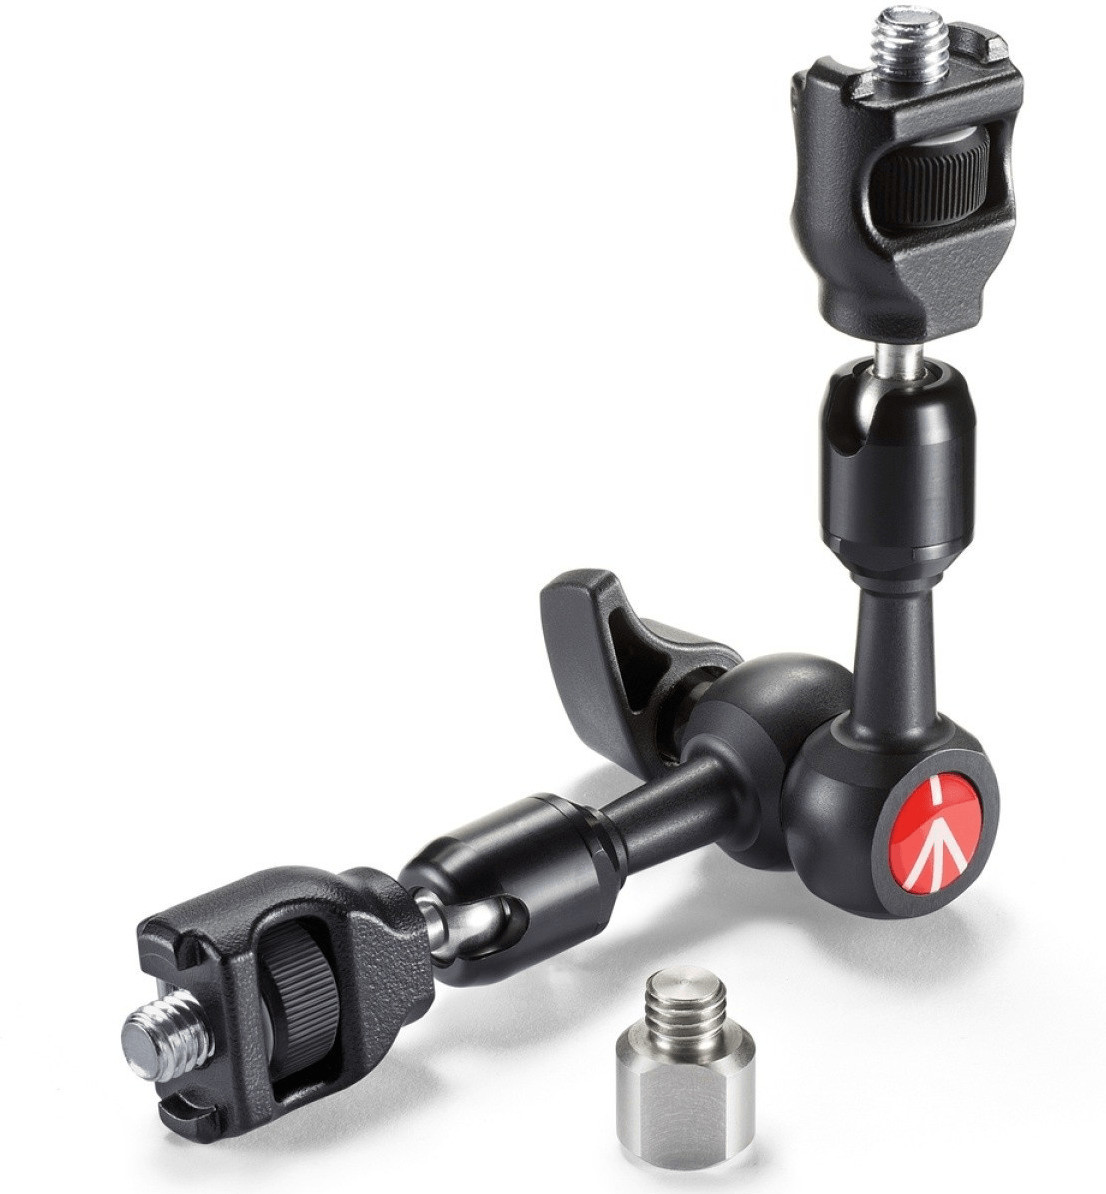 Photos - Other photo accessories Manfrotto 244MICRO-AR 